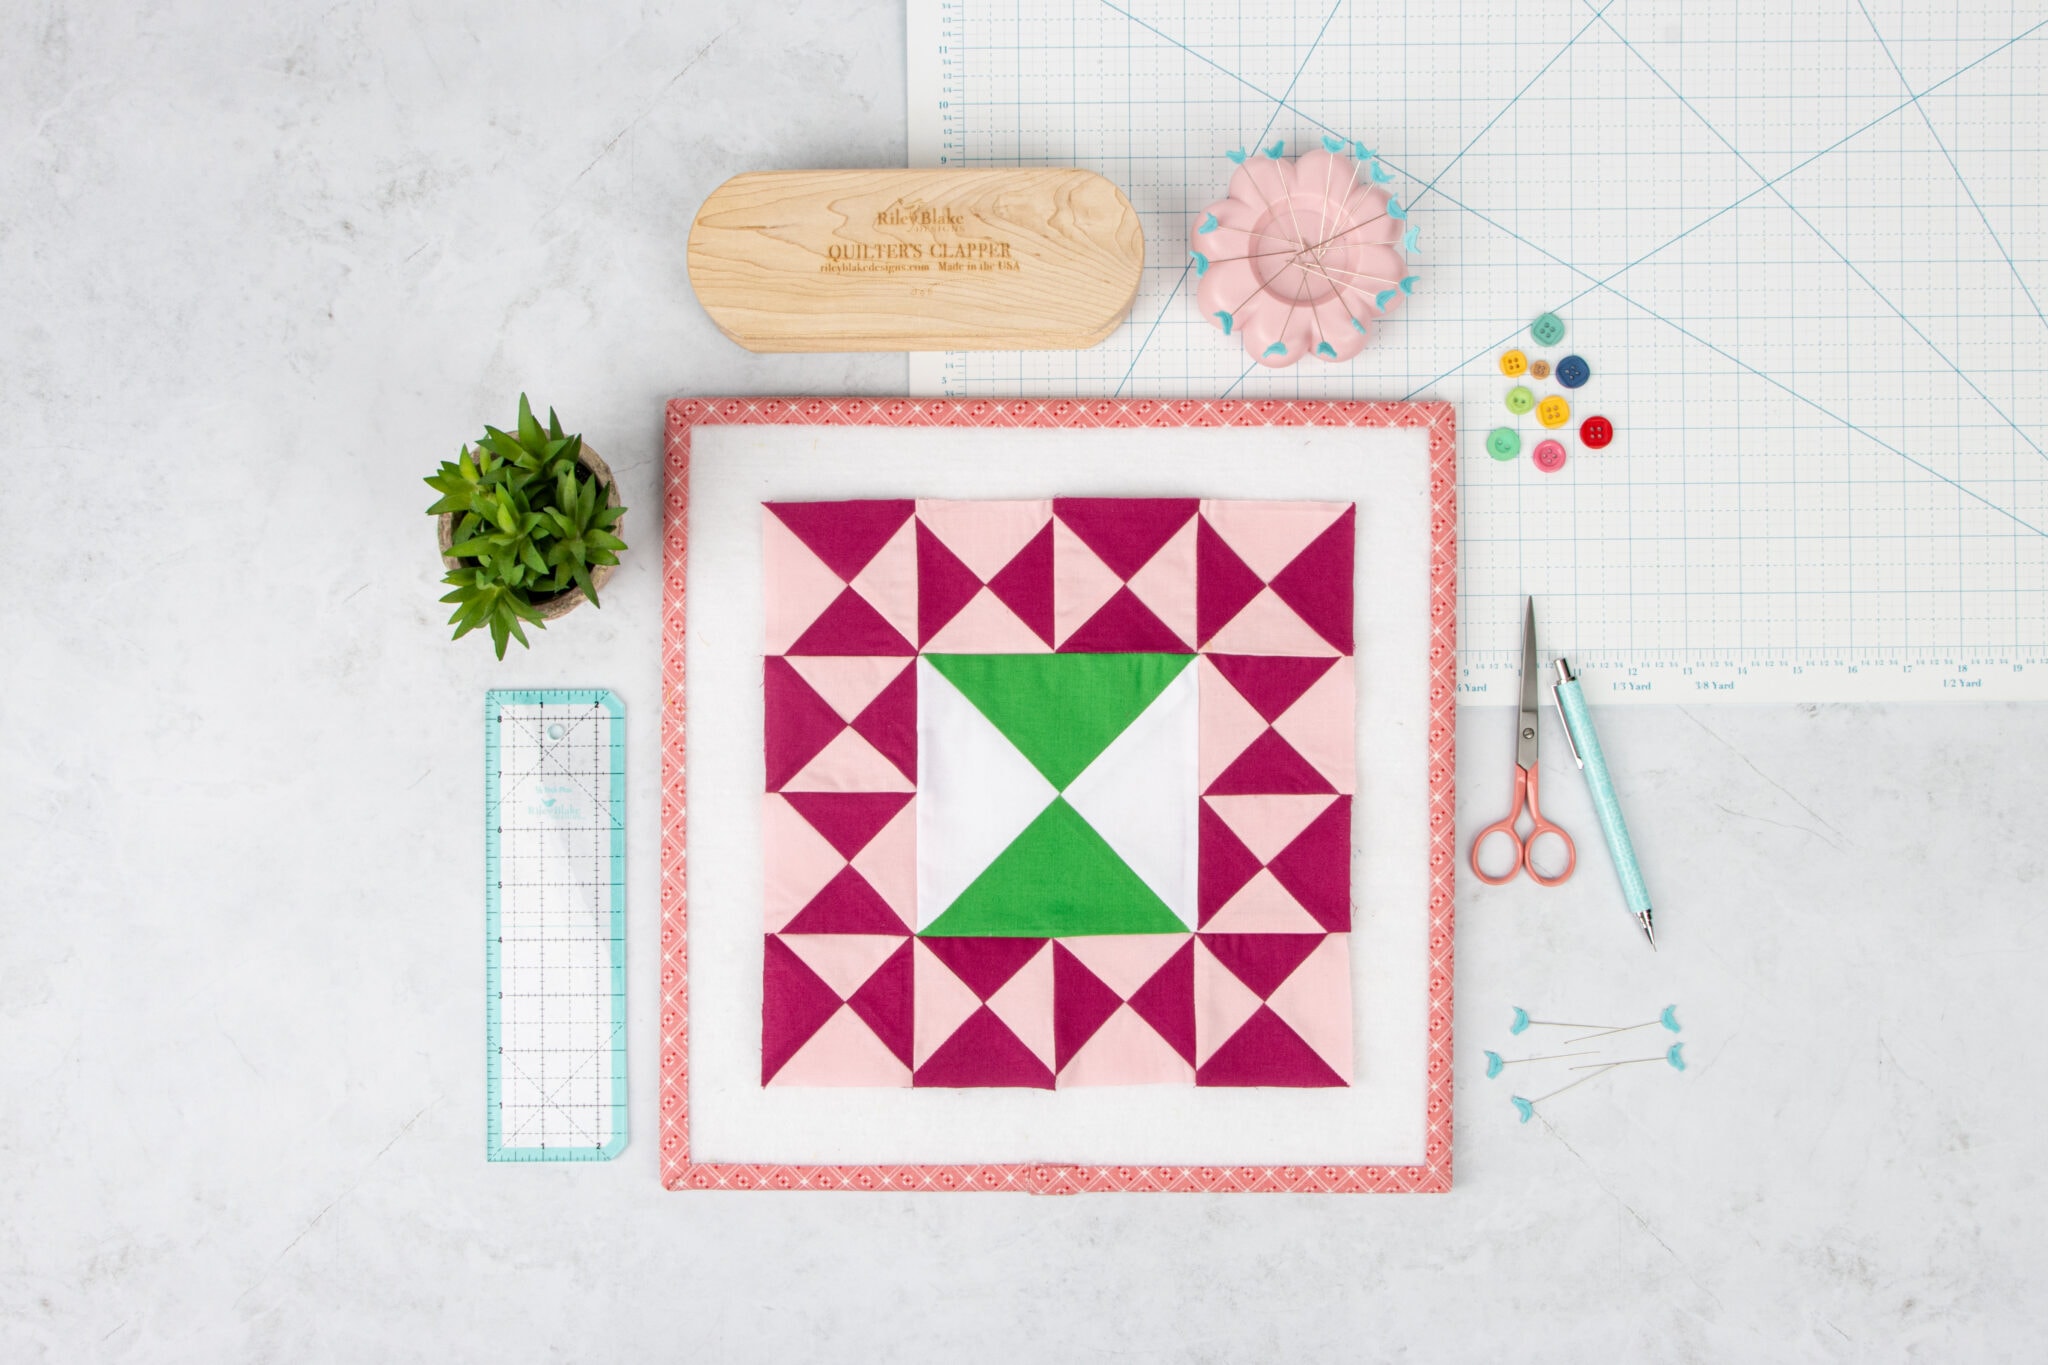 pink, white and green quilt block on table